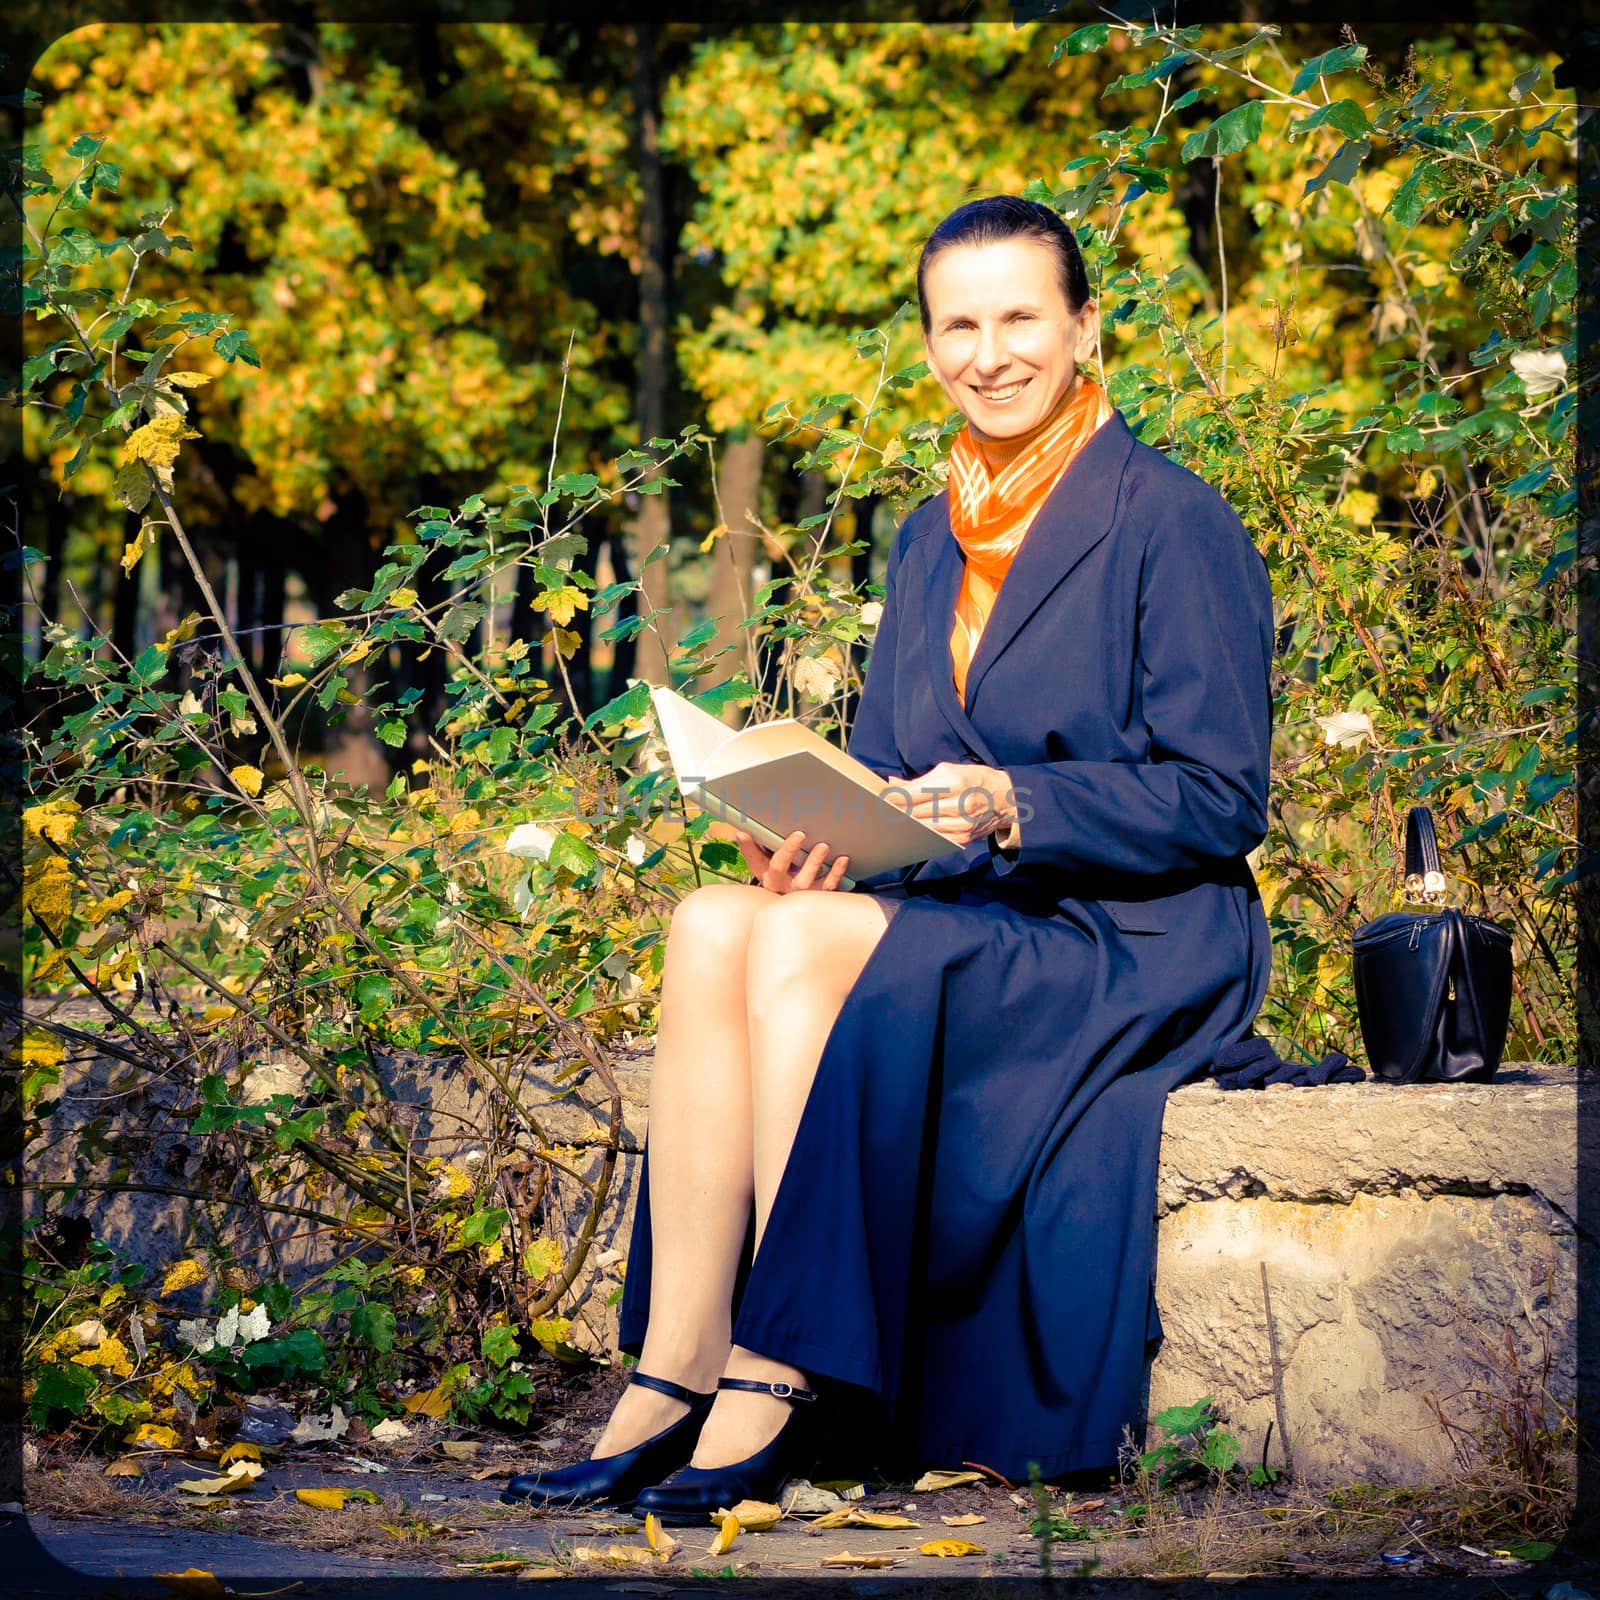 Sexy senior woman reading a book in the park during a sunny autumn day